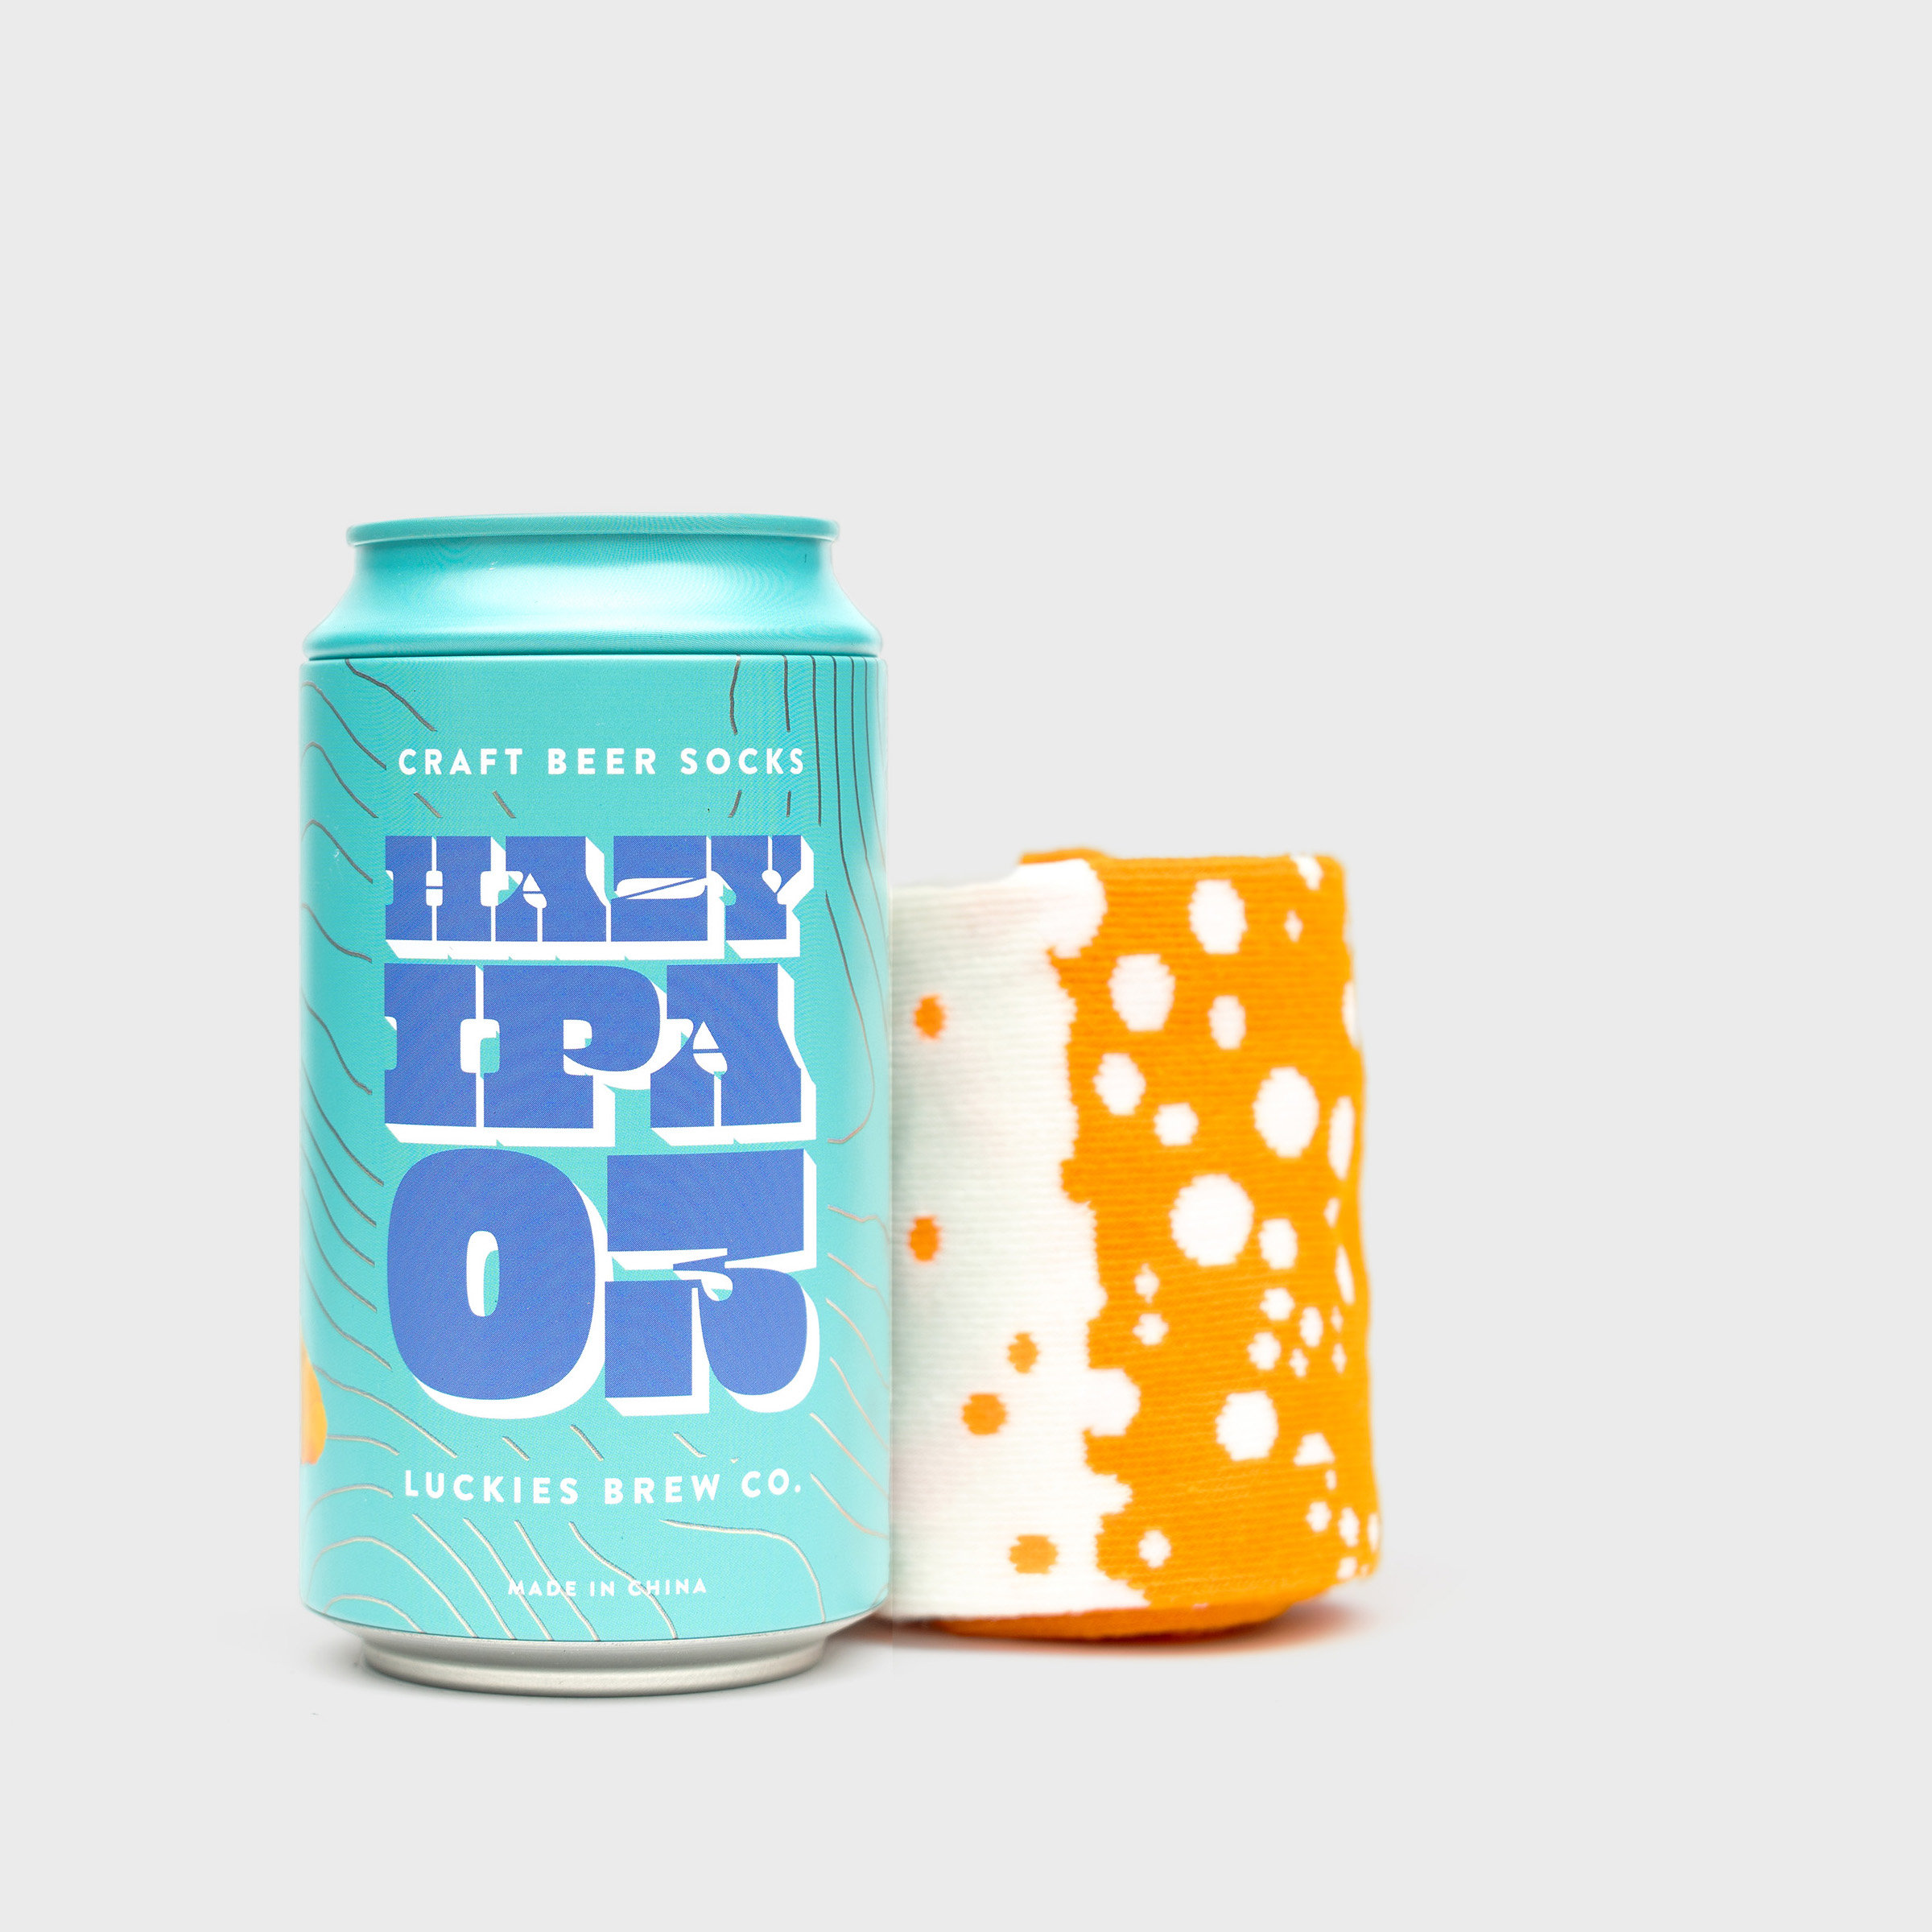 Craft Beer Socks IPA in a Can§